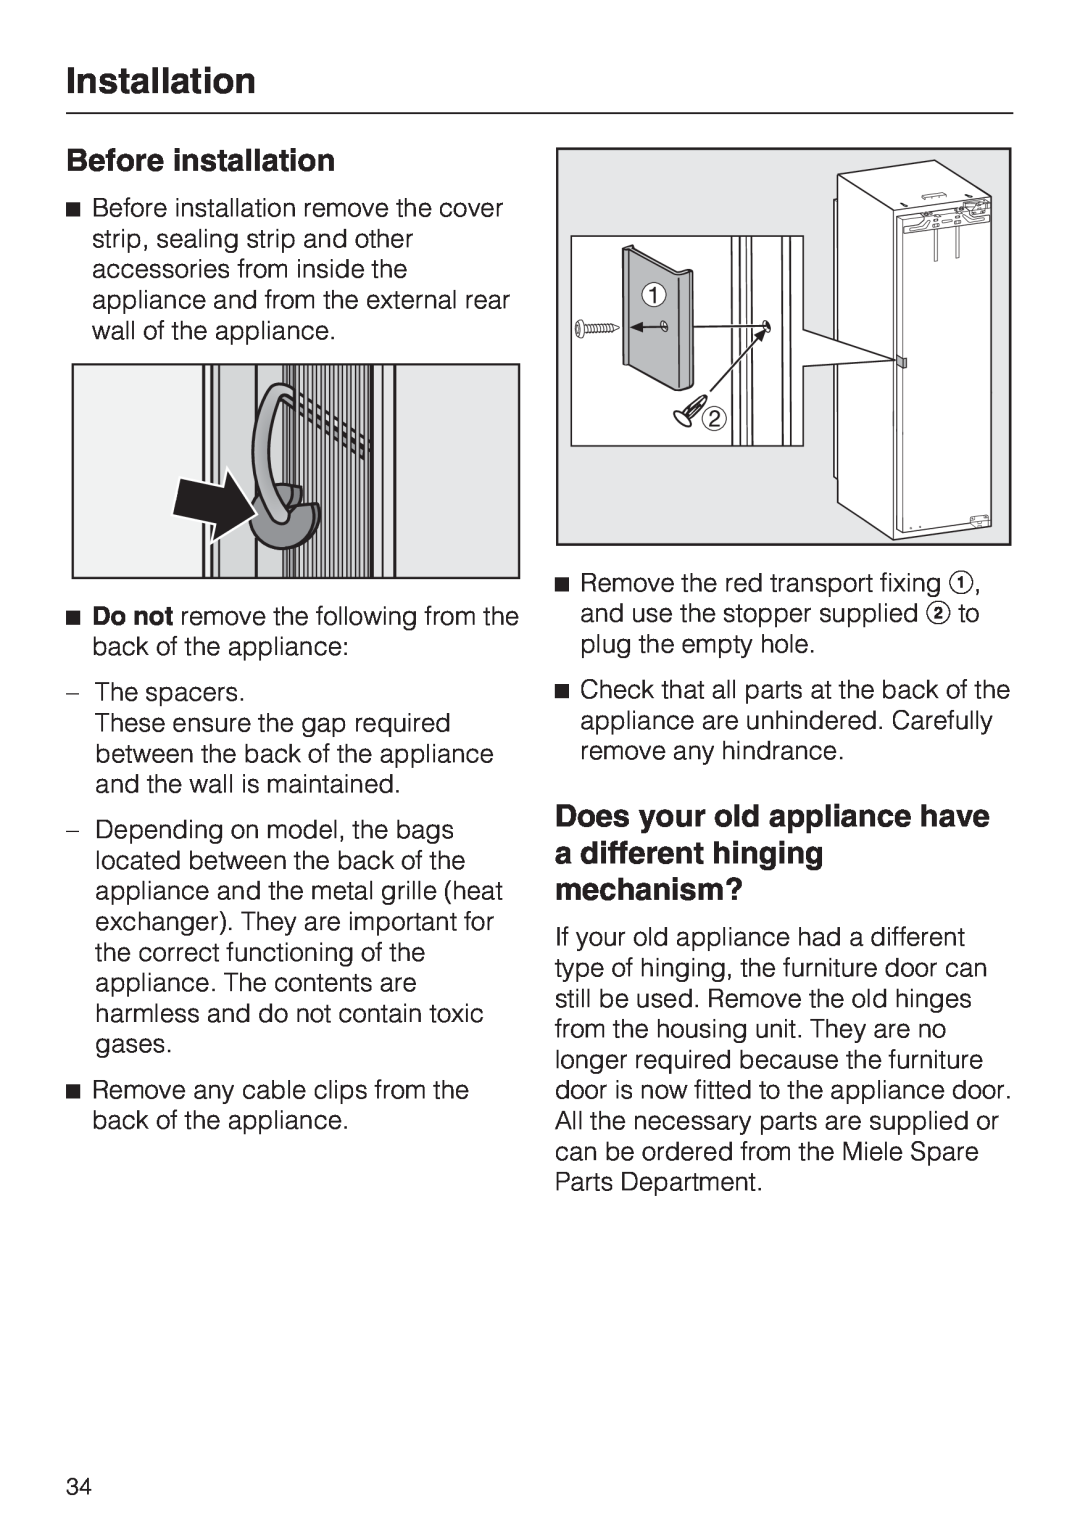 Miele K9752, K9552 installation instructions Before installation, Installation 